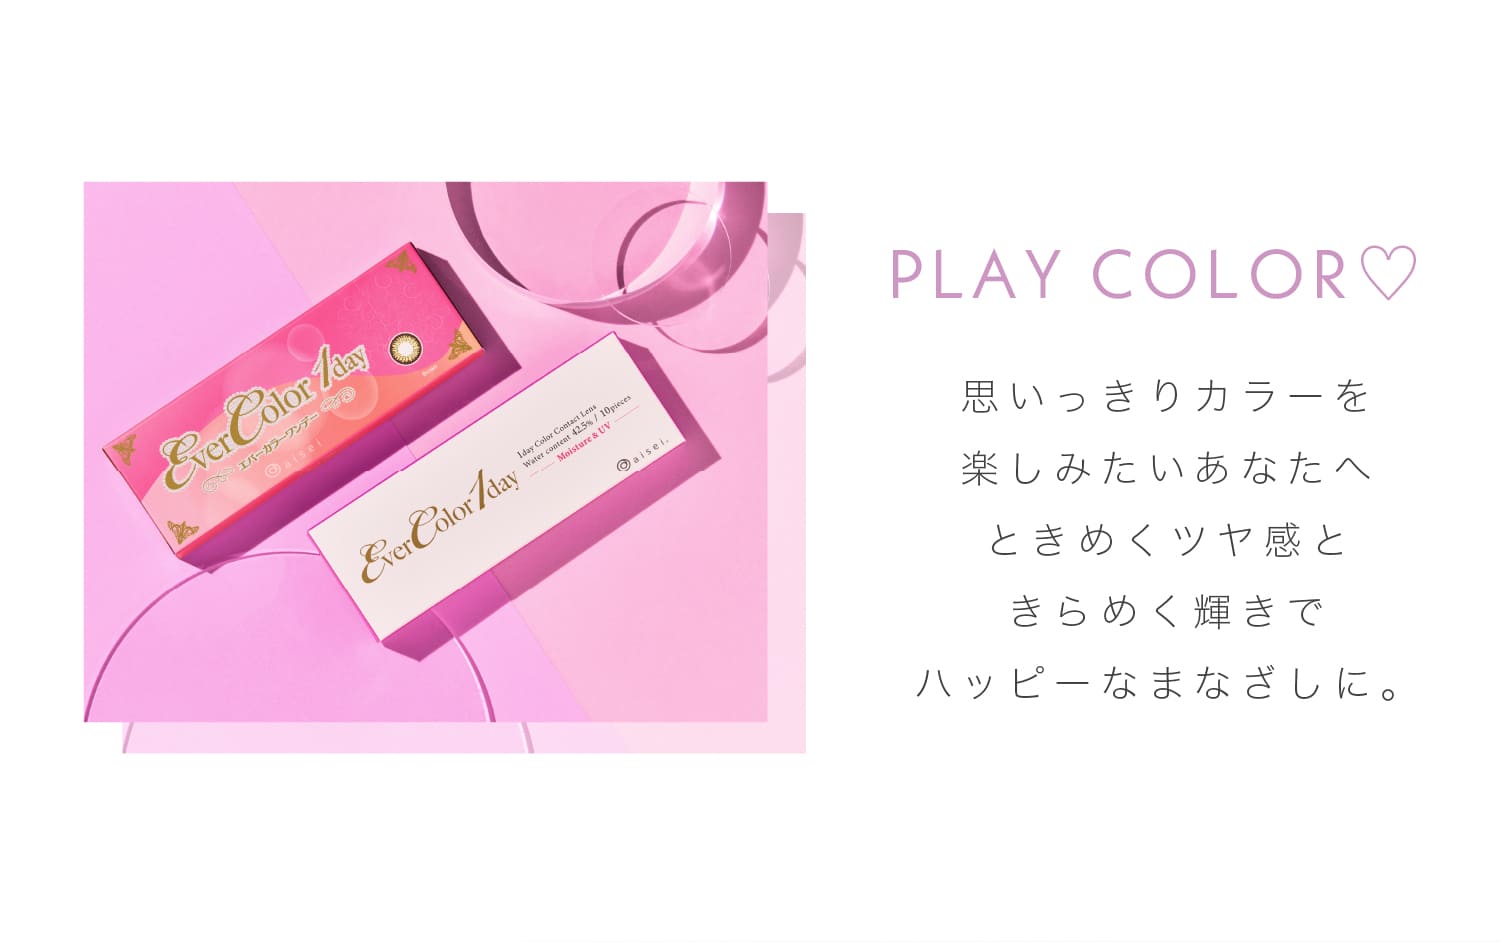 PLAY COLOR